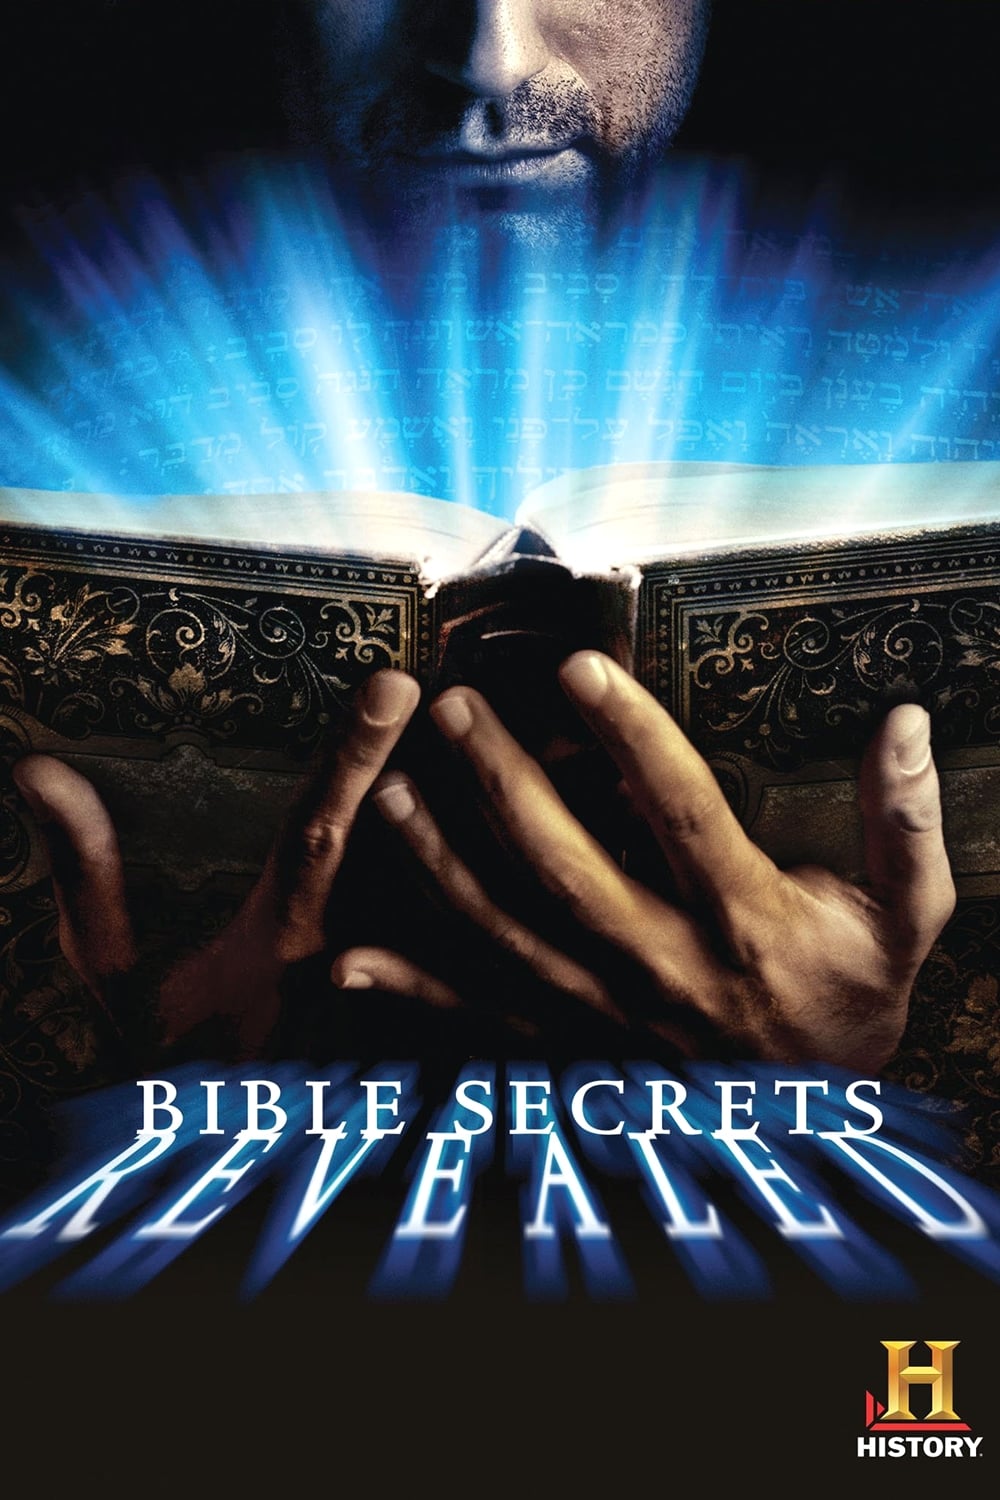 Bible Secrets Revealed TV Shows About Research